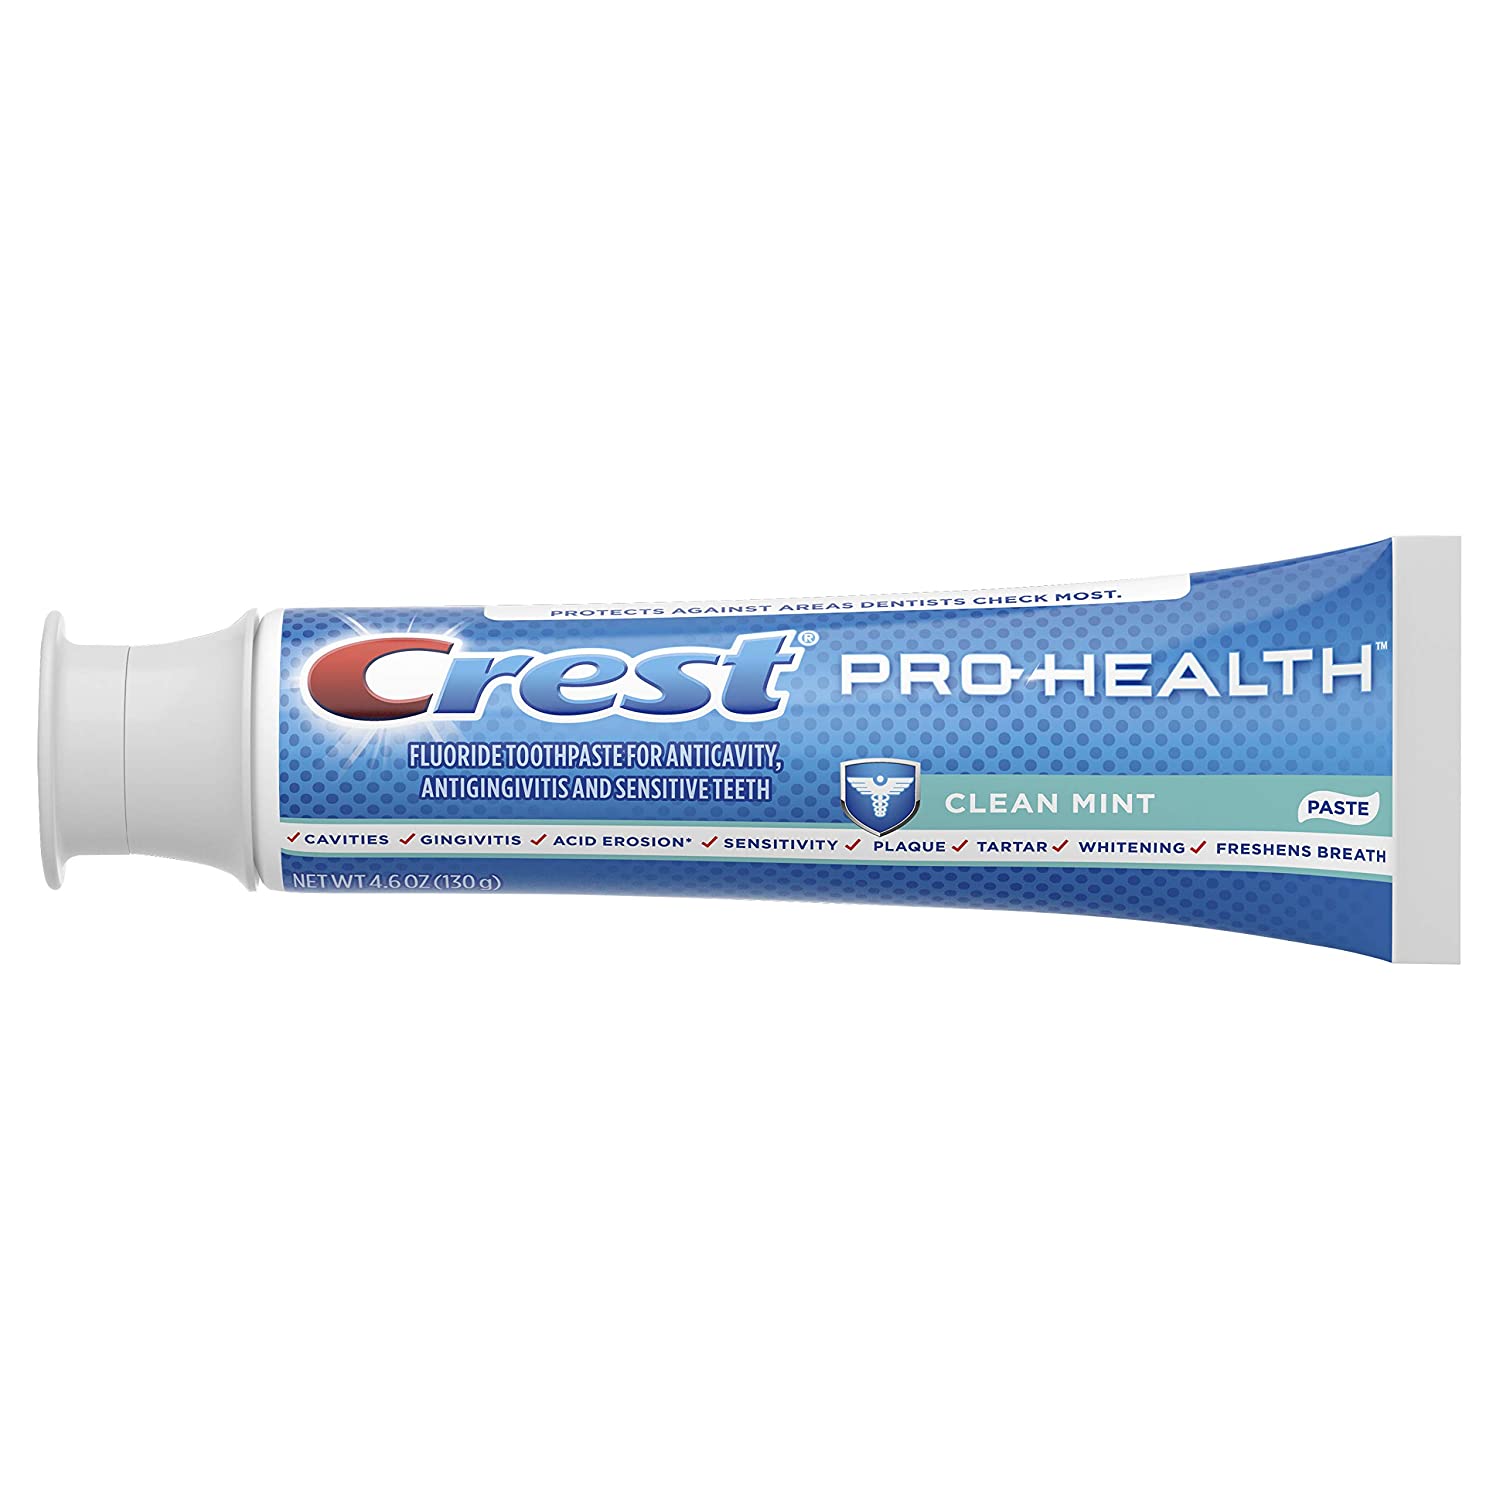 Crest Pro Health Smooth Formula Toothpaste, Clean Mint, 4.6 oz, 3 Pk - image 3 of 7